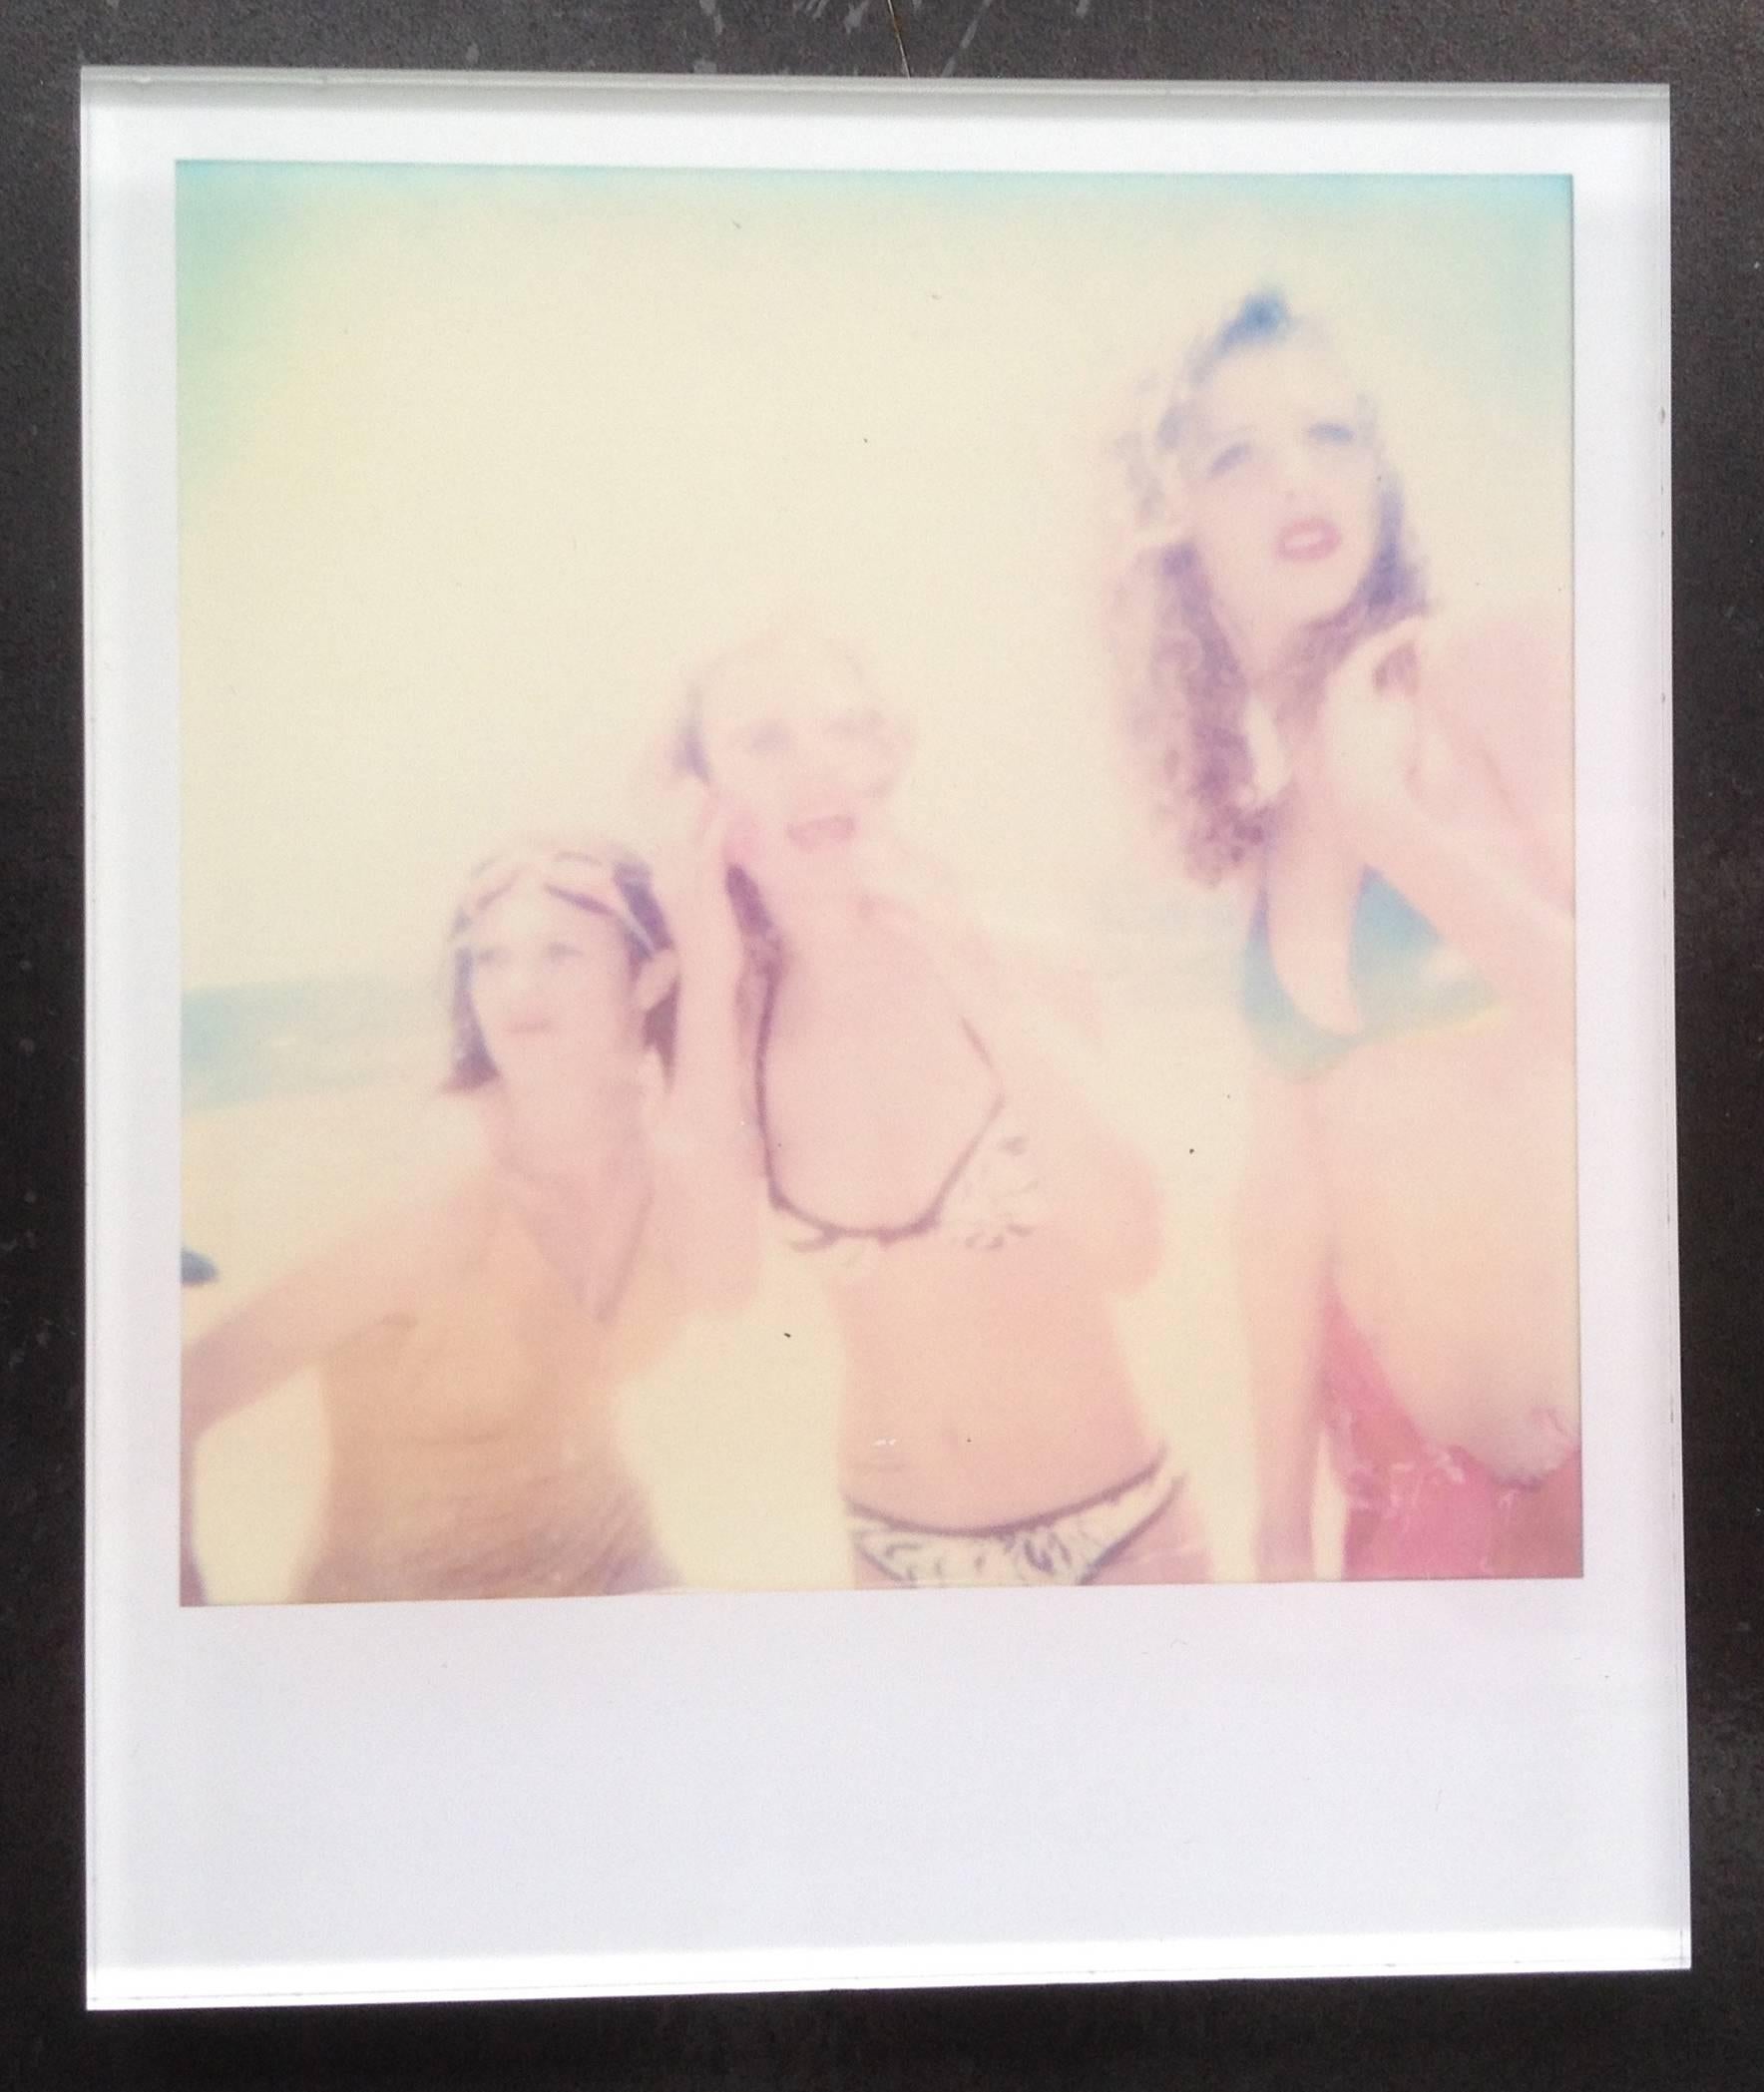 Stefanie Schneider's Minis
'Untitled #2' (Beachshoot) featuring Radha Mitchell, 2005
signed and signature brand on verso
Lambda digital Color Photographs based on the Polaroid

Polaroid sized open Editions 1999-2013
10.7 x 8.8cm (Image